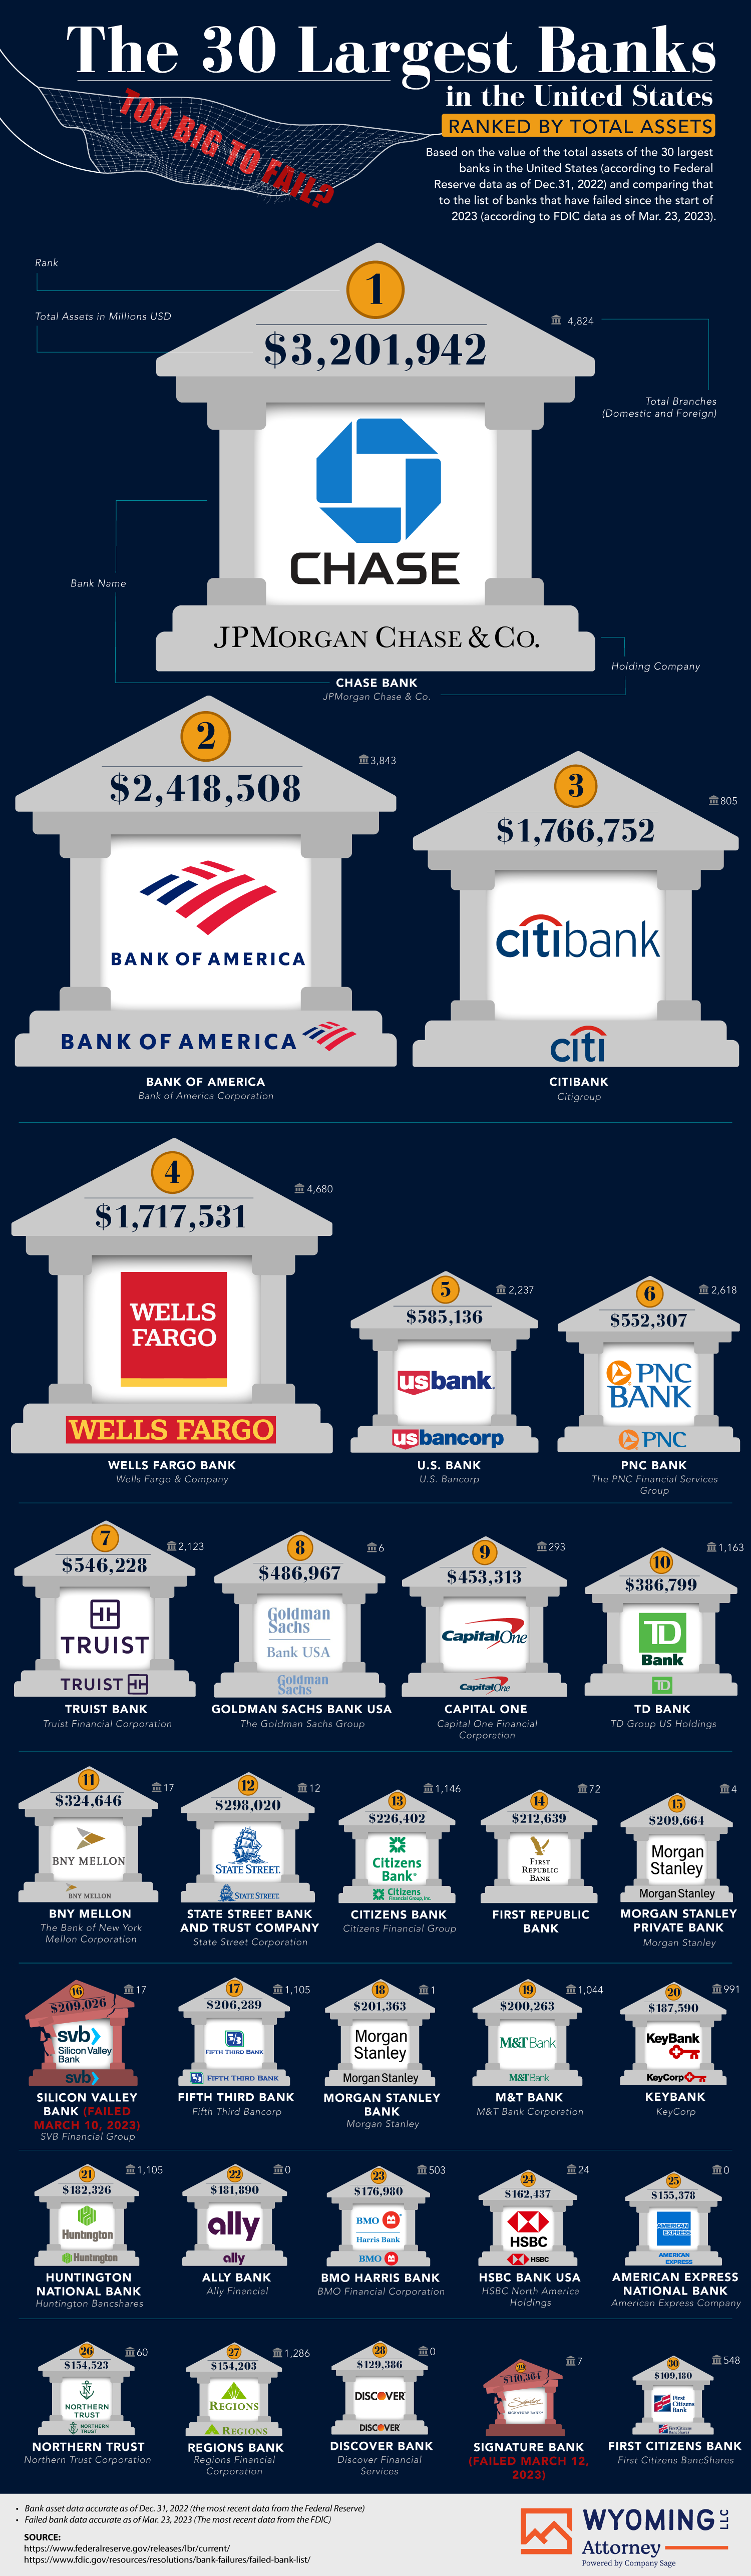 Ranking the 30 Largest Banks by Total Assets